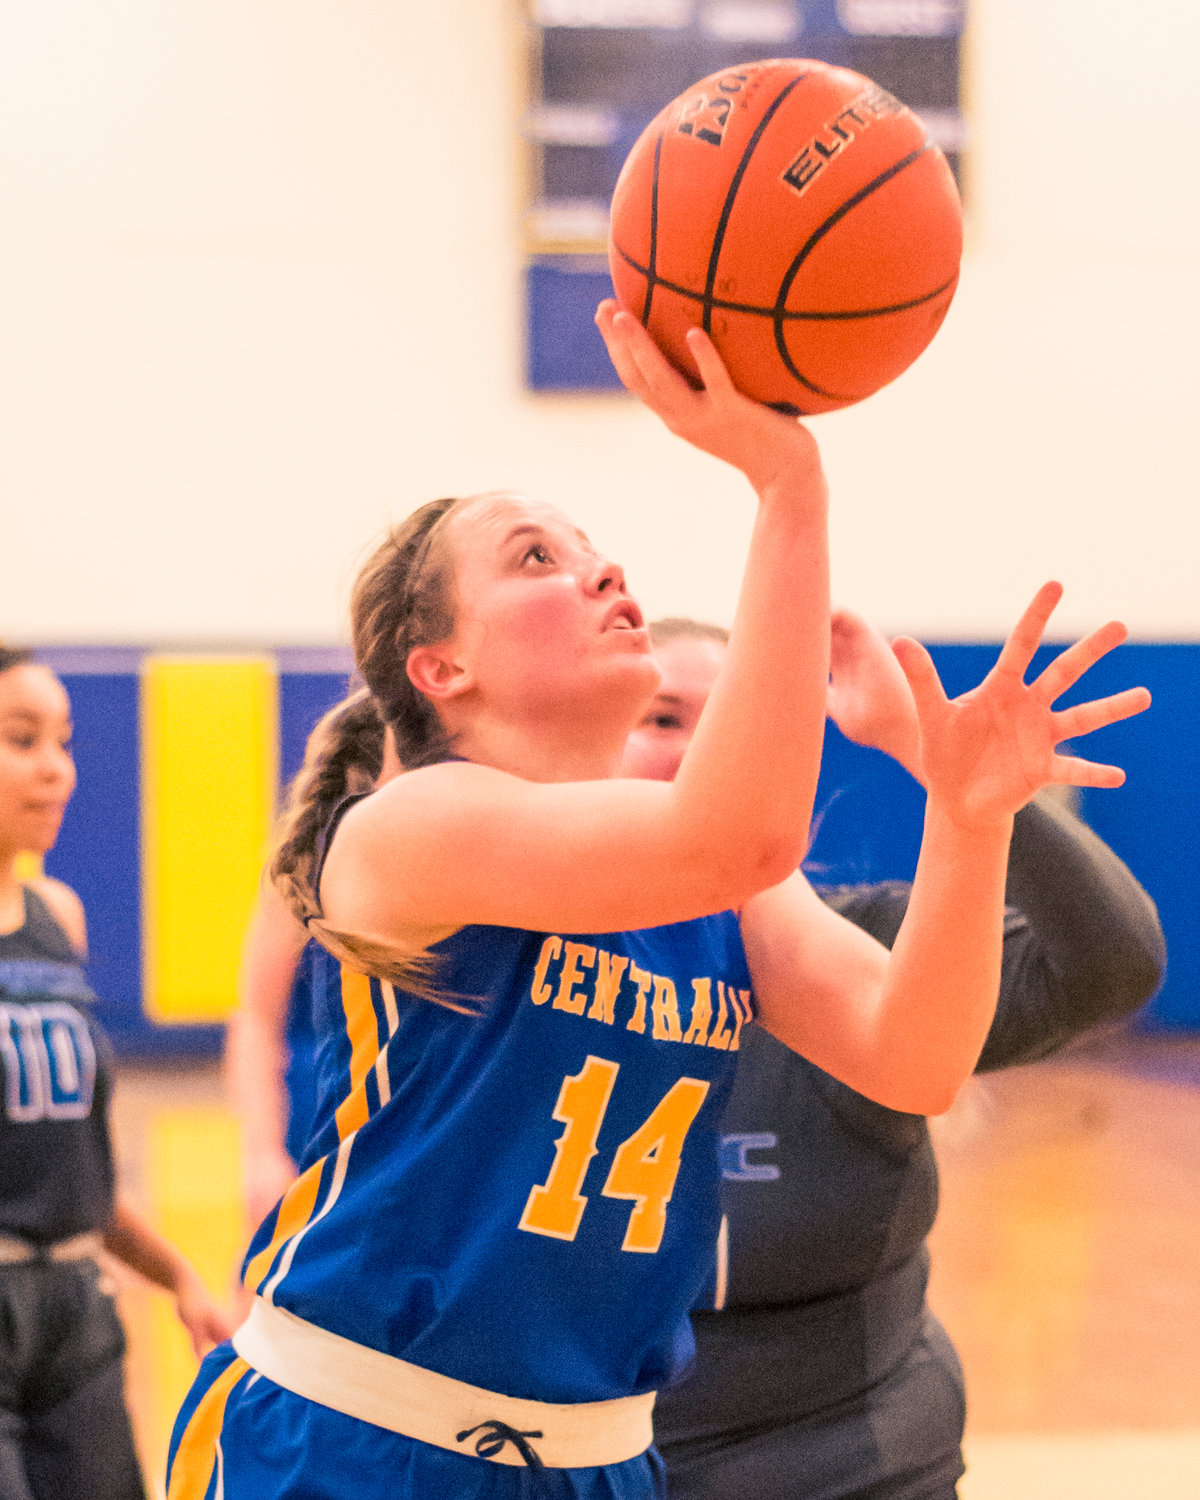 Centralia's Megan Cash (14) takes aim during a women's basketball game against S.P.S.C.C Wednesday night at Centralia College.